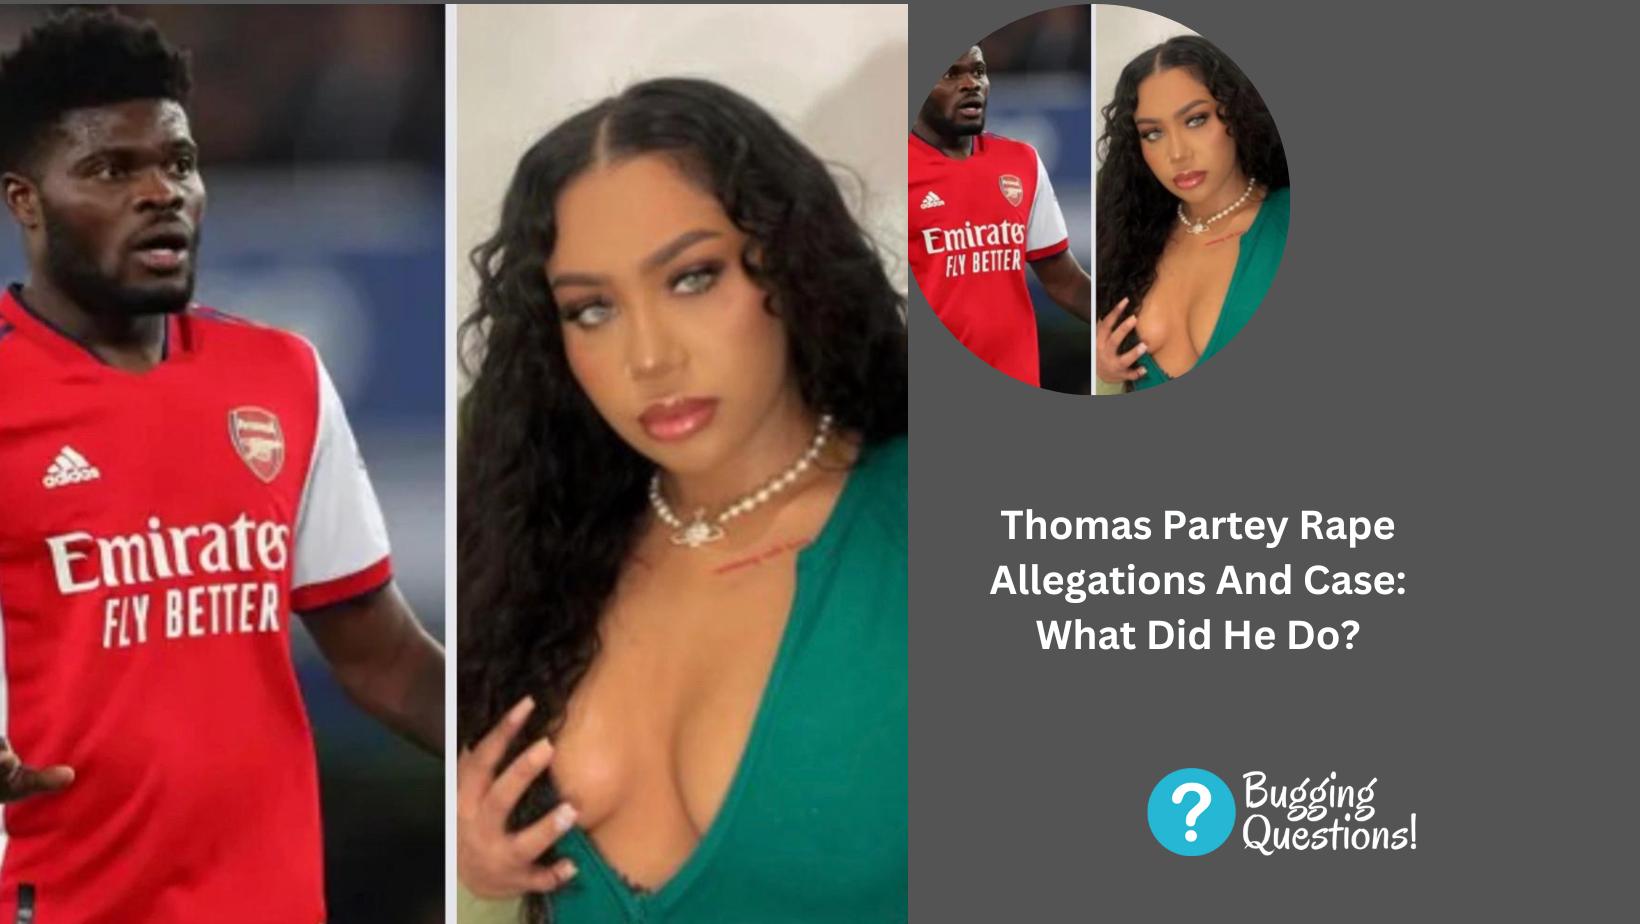 Thomas Partey Rape Allegations And Case: What Did He Do?